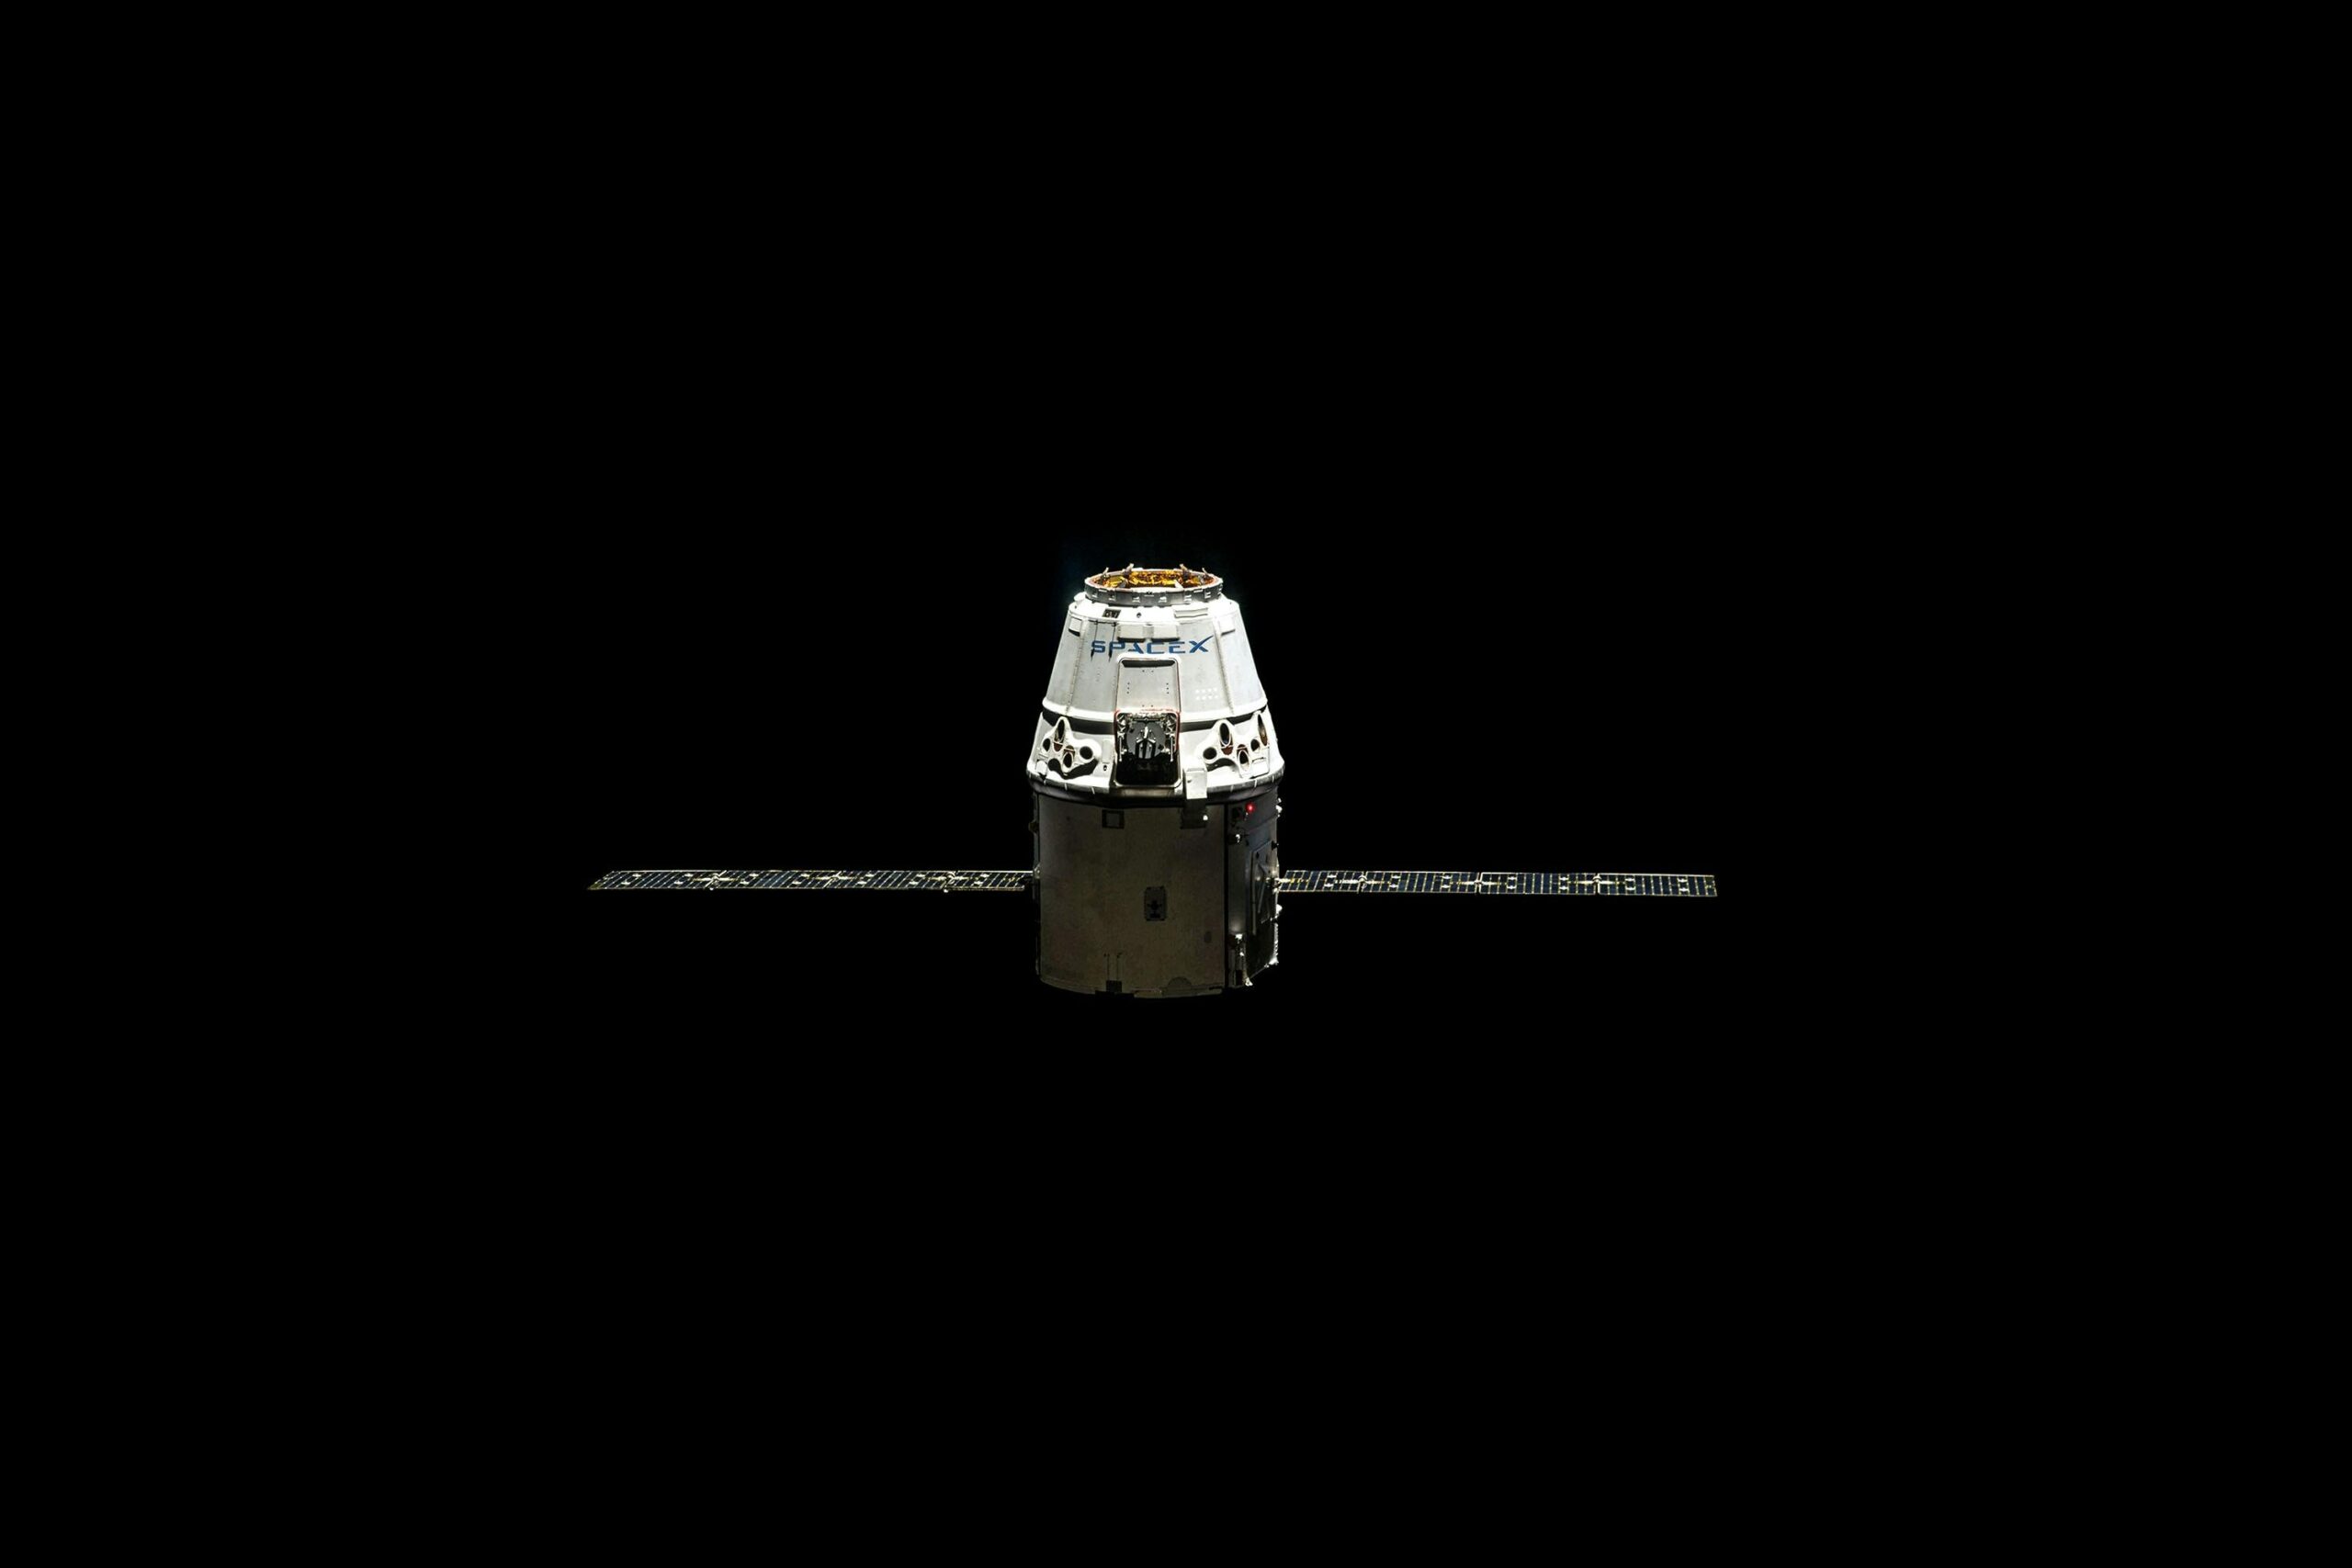 Space X Crew Dragon spacecraft isolated on a black background with solar panels extended, representing modern space travel and exploration.